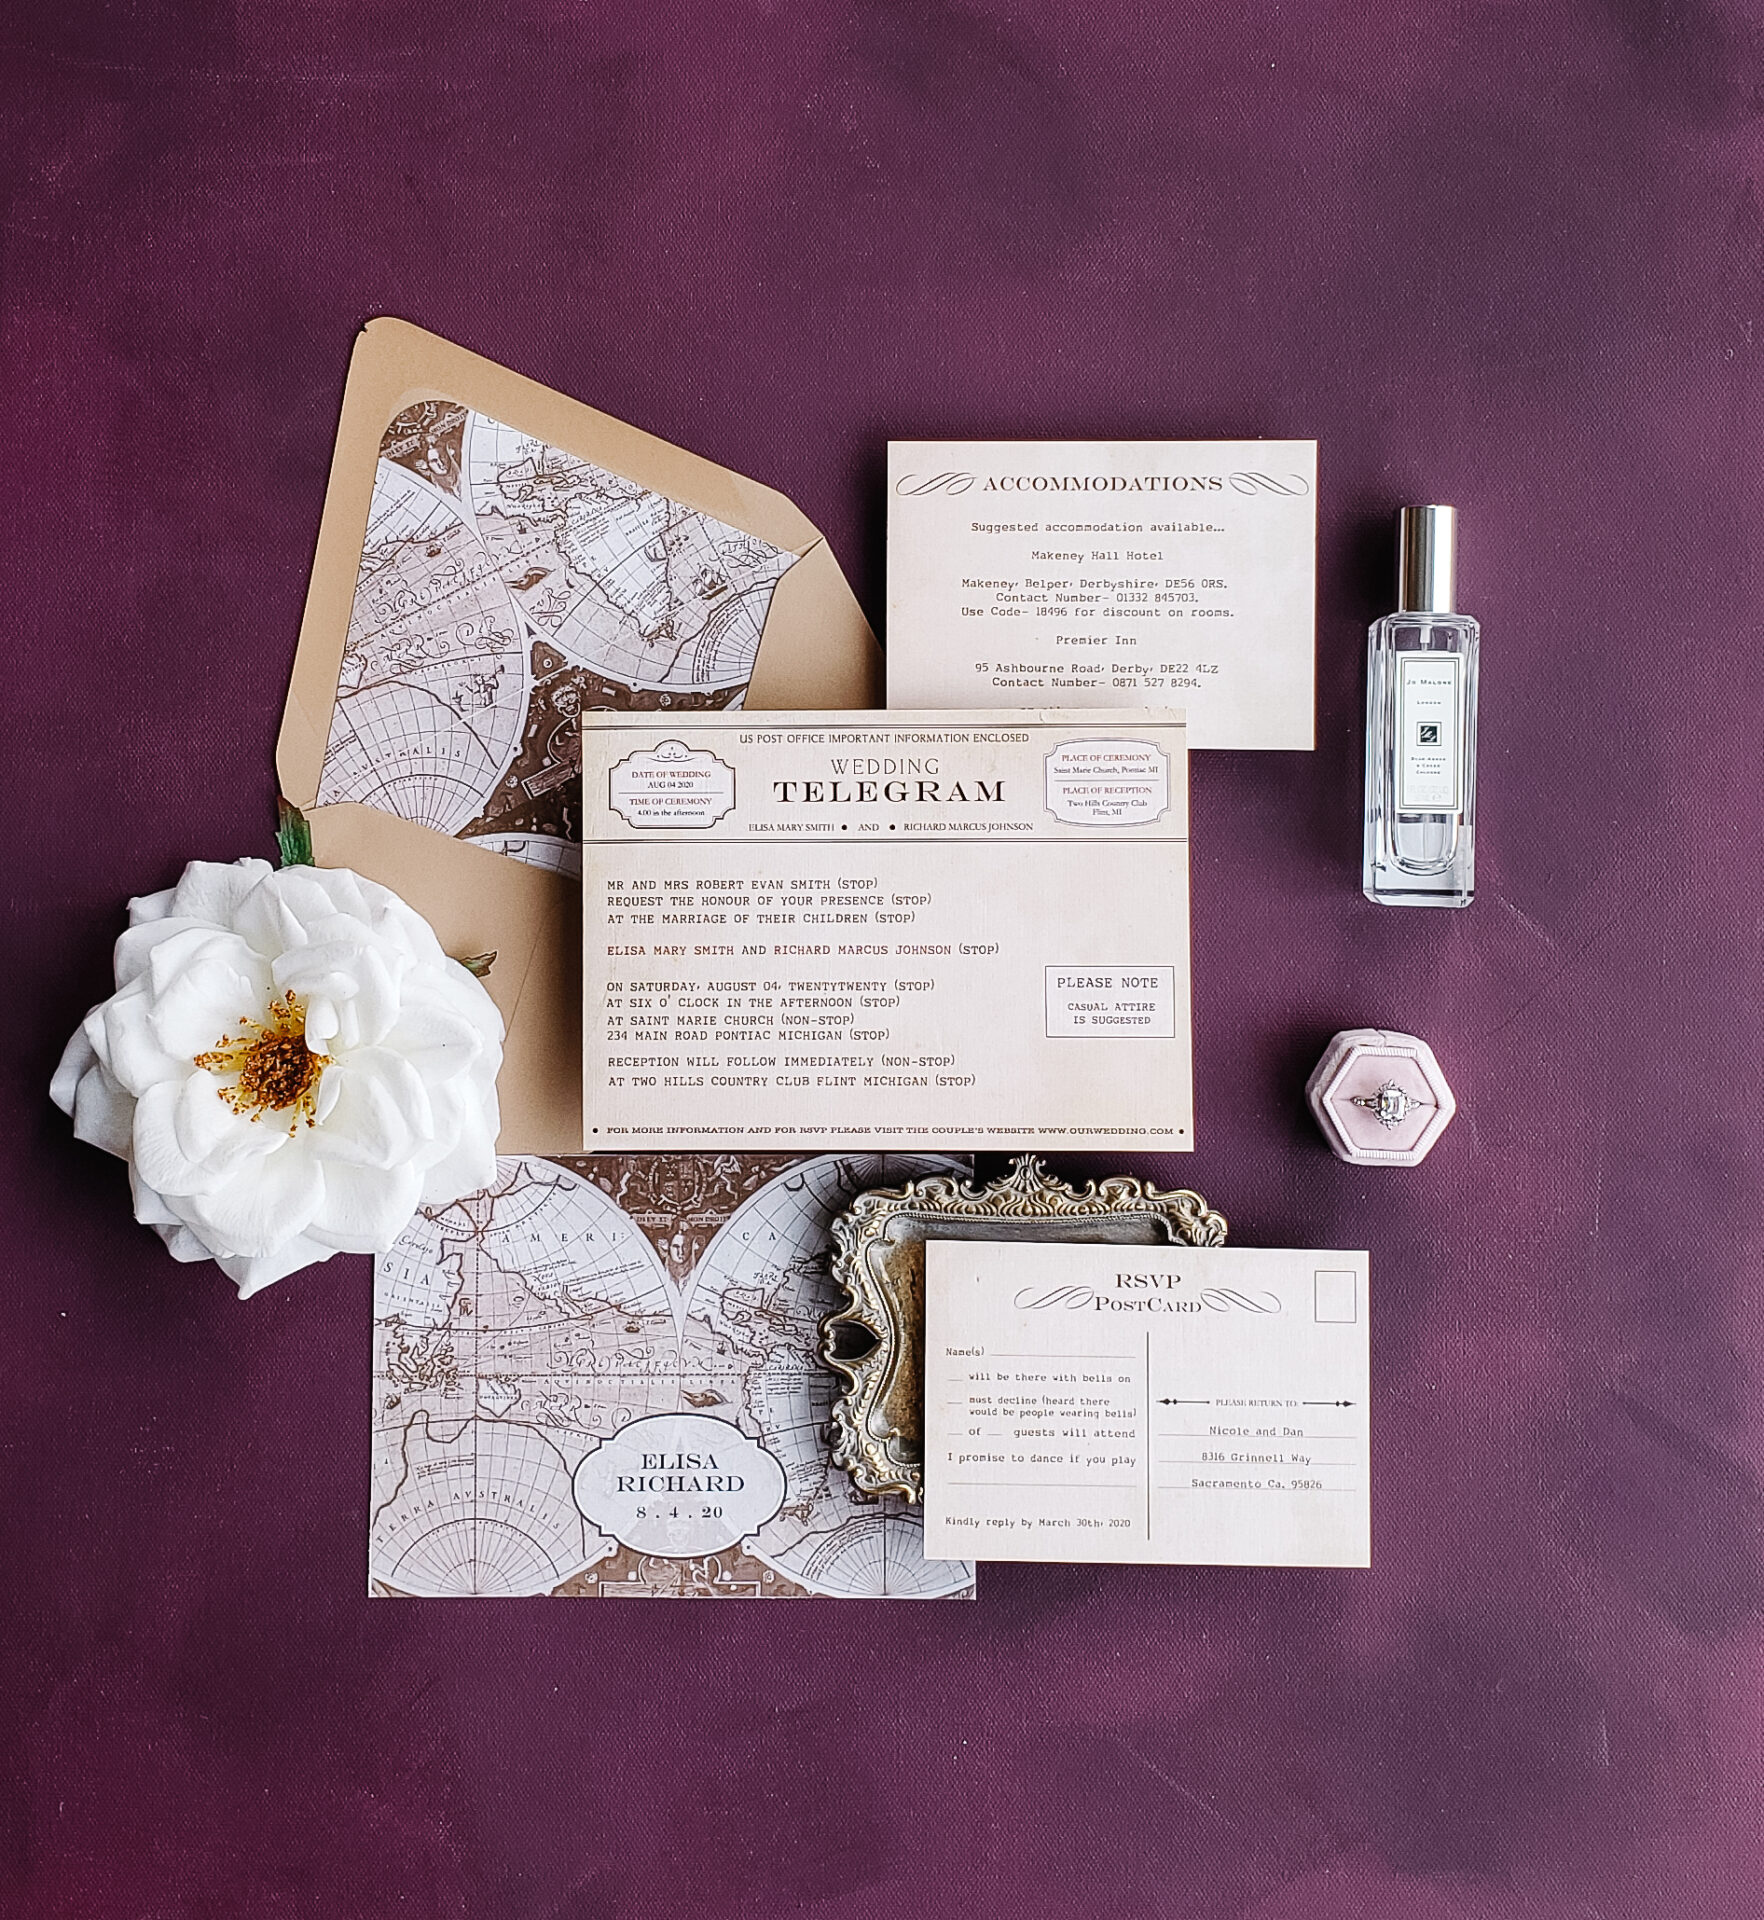 [vc_row][vc_column][vc_column_text]Purchase this listing to get a sample of our New York wedding invitation suite.

The sample includes:

• 5.25